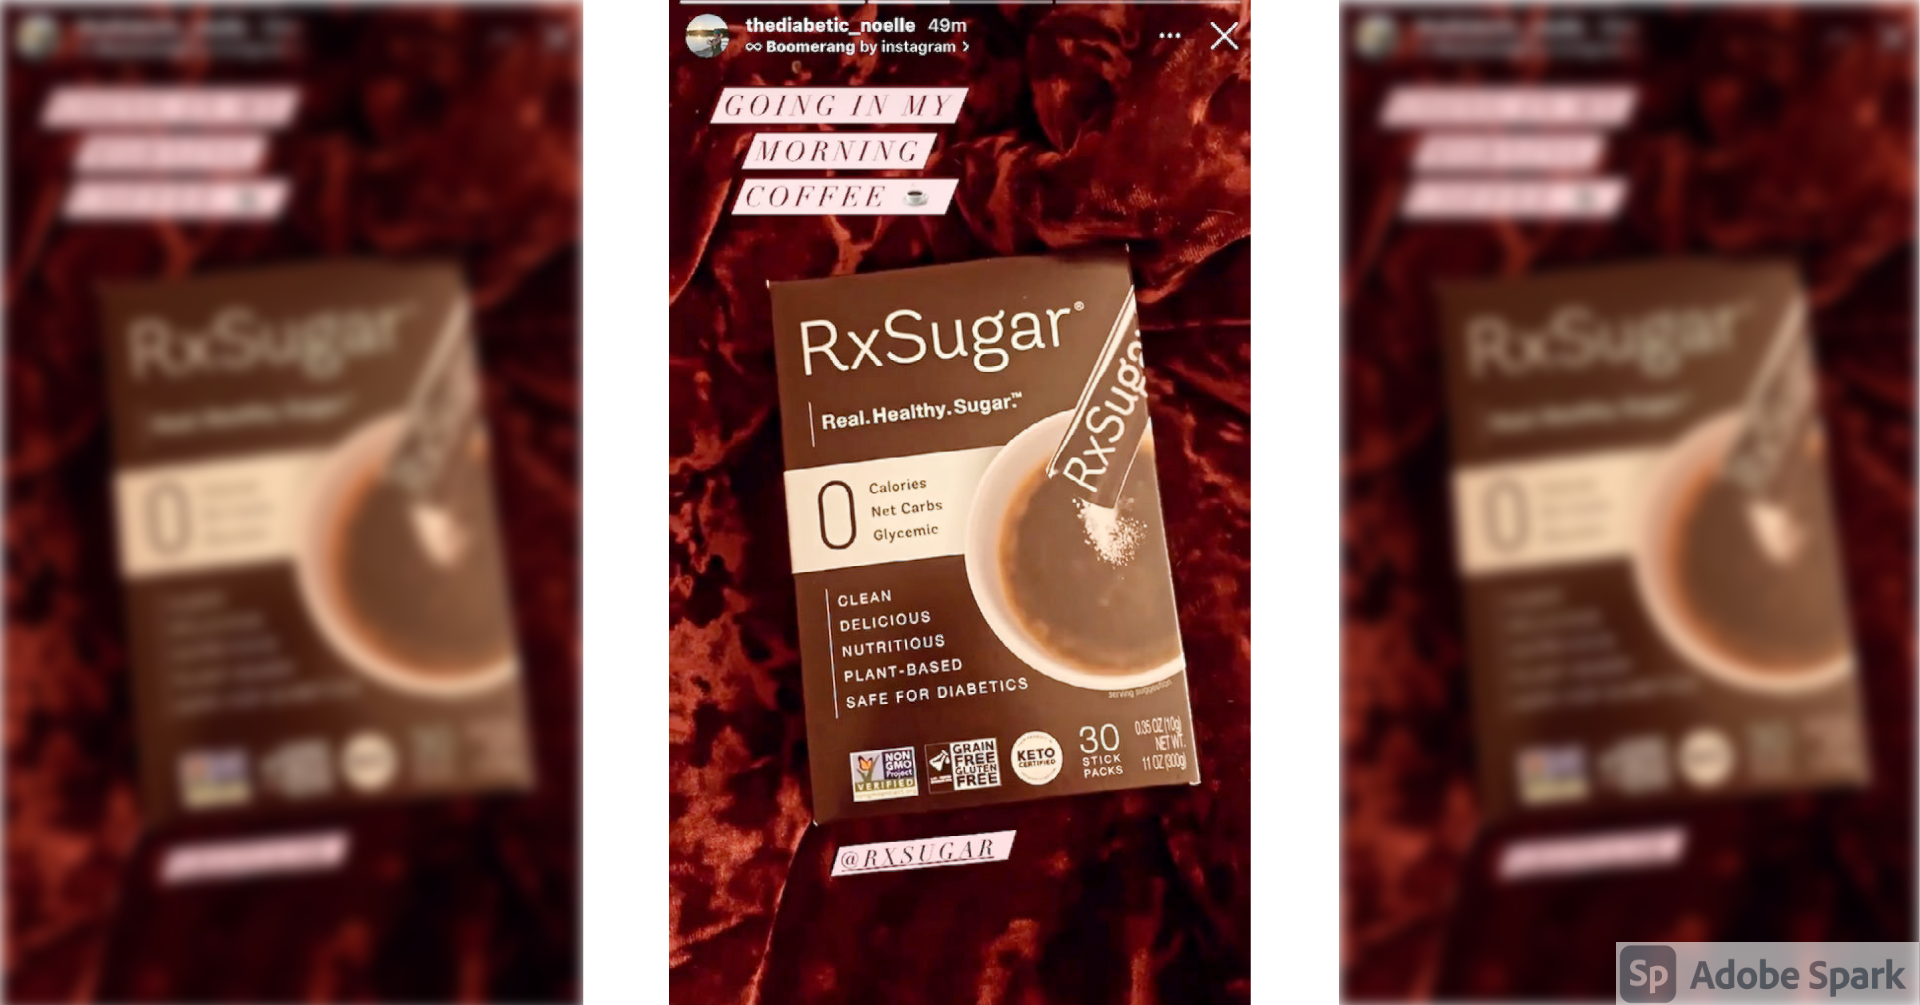 The Diabetic Noelle Trying The RxSugar Sugar Stick Pack